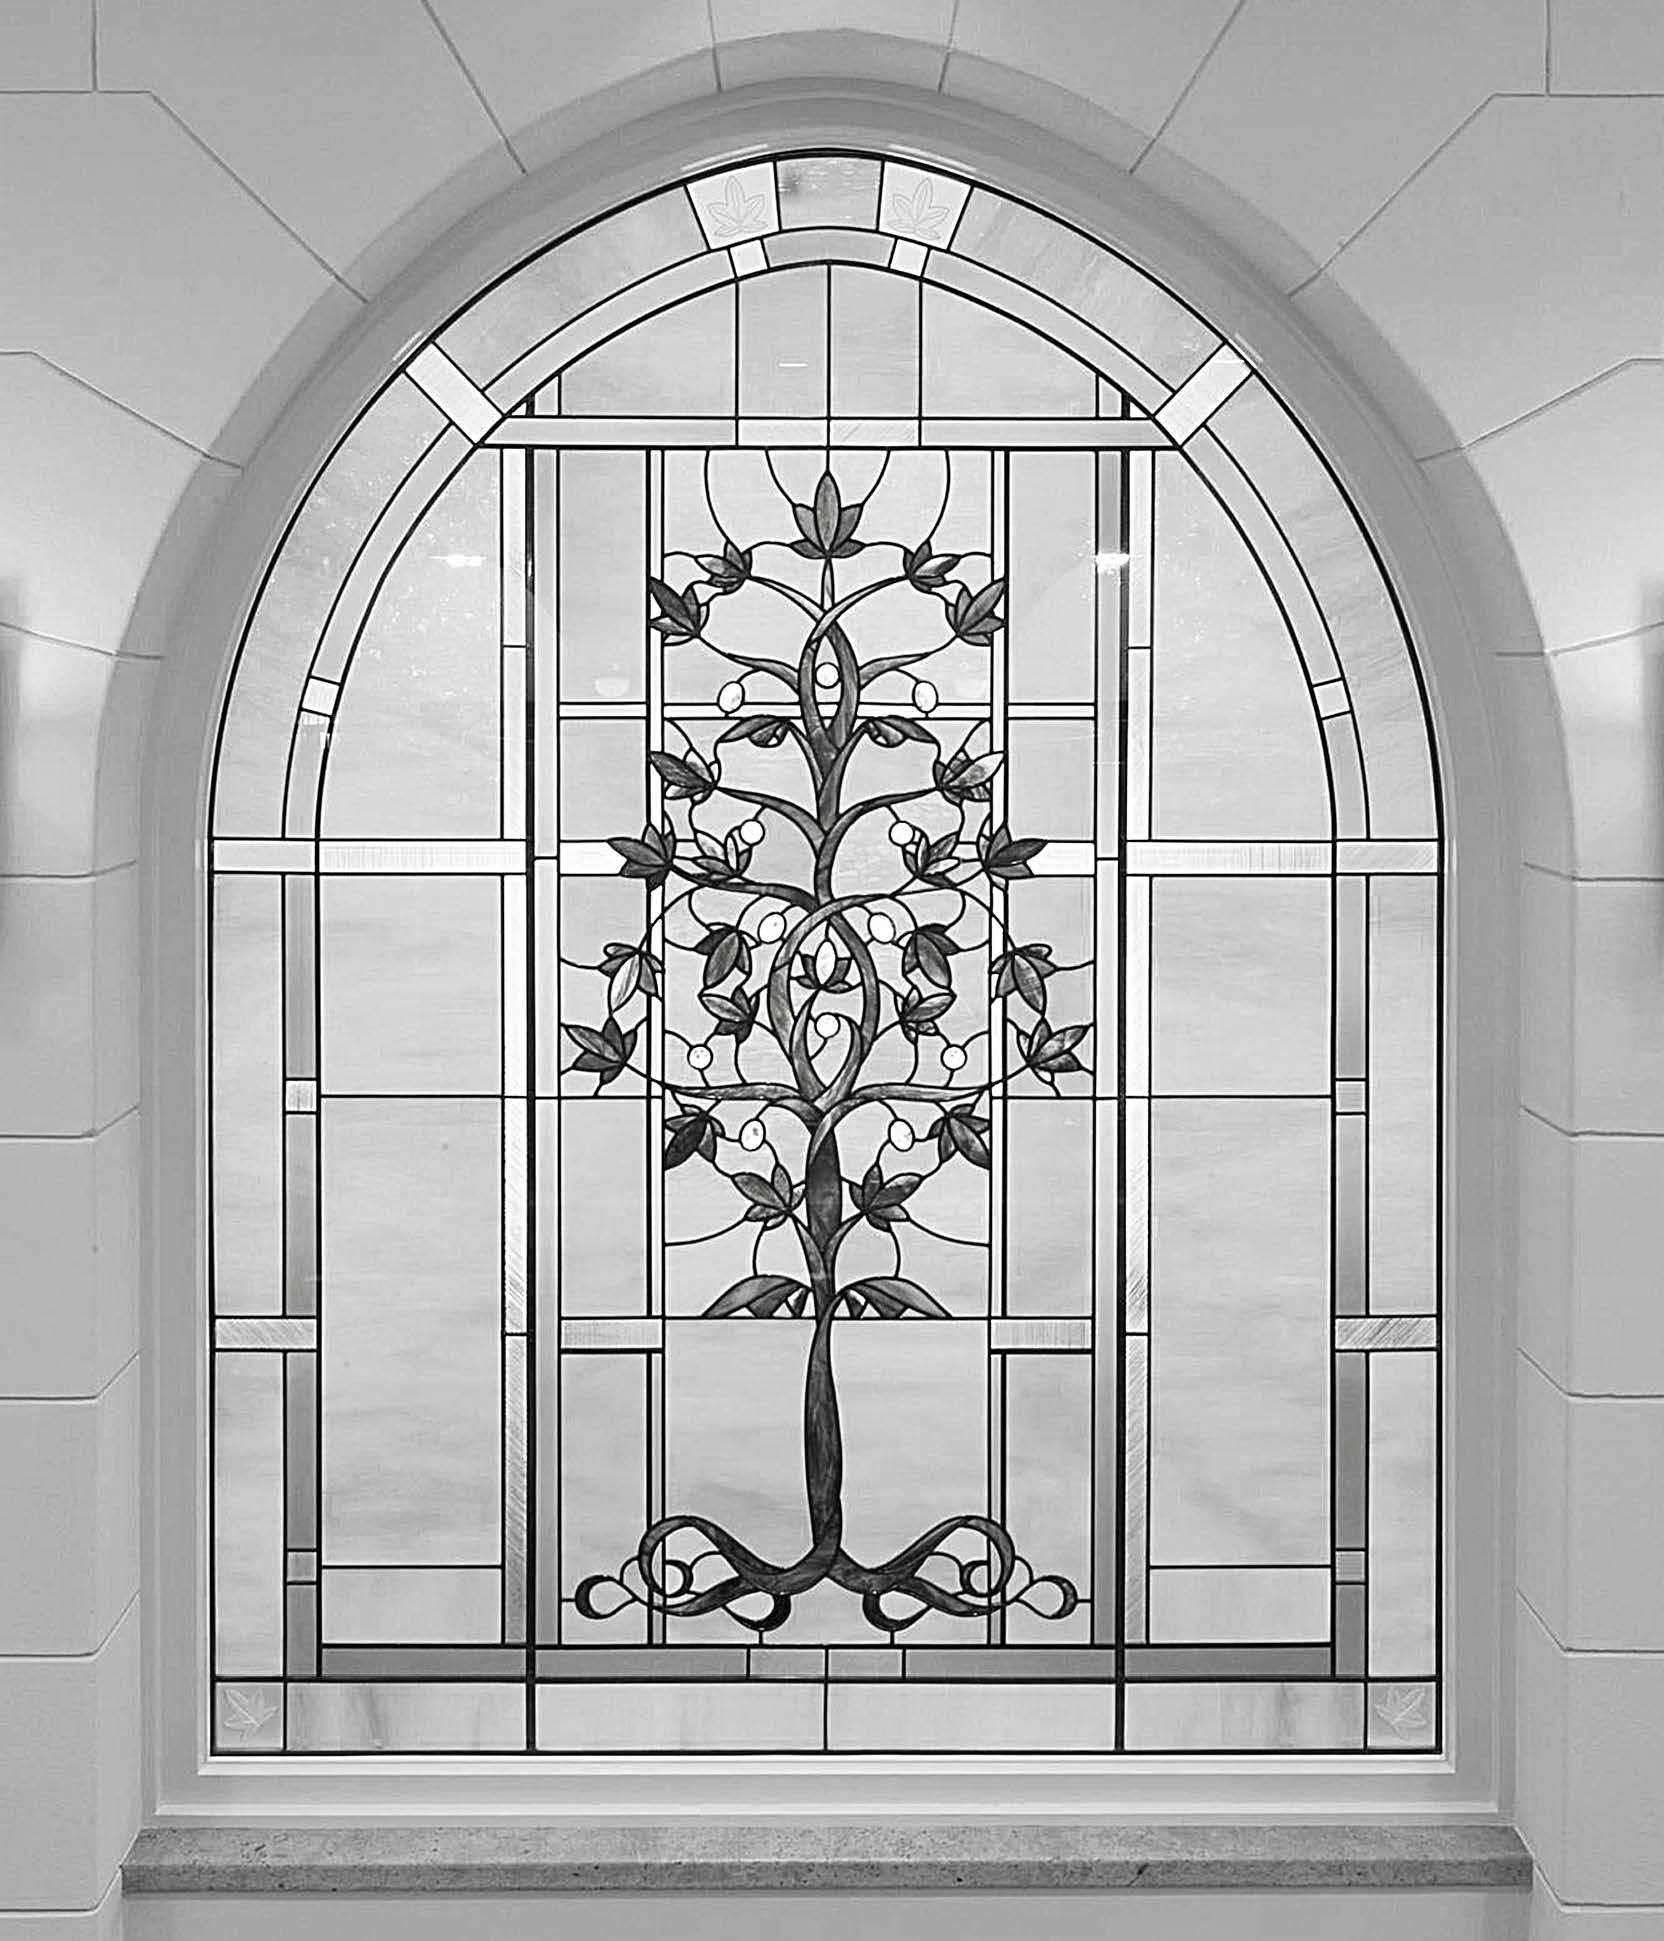 Glass art depicting the kukui tree (chosen for its historical significance in the Hawaiian culture) was added to the baptistry to emphasize the theme of partaking and sharing of the tree of life. © IRI. Used with permission.